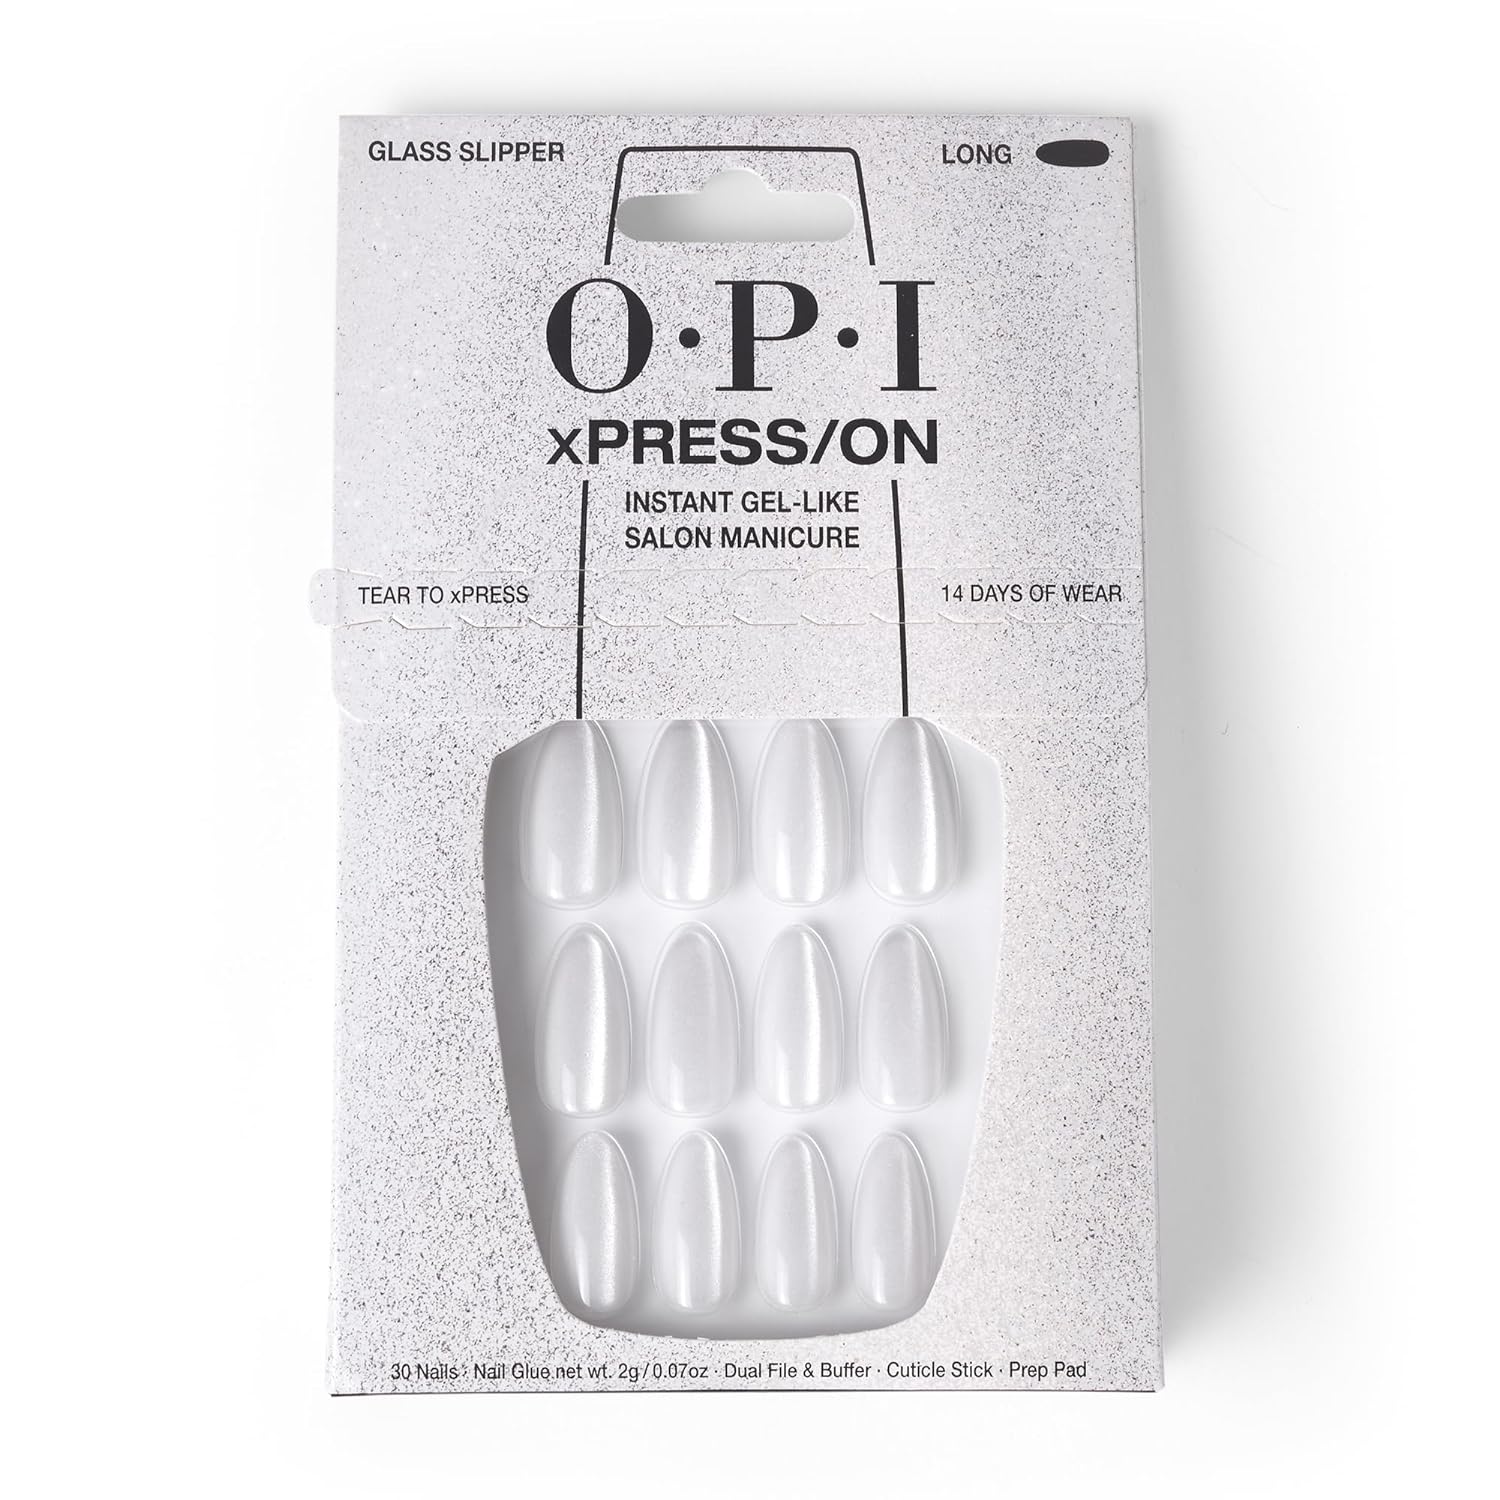 opi xpresson press on nails up to 14 days of gel like salon manicure vegan sustainable packaging with nail glue long whi